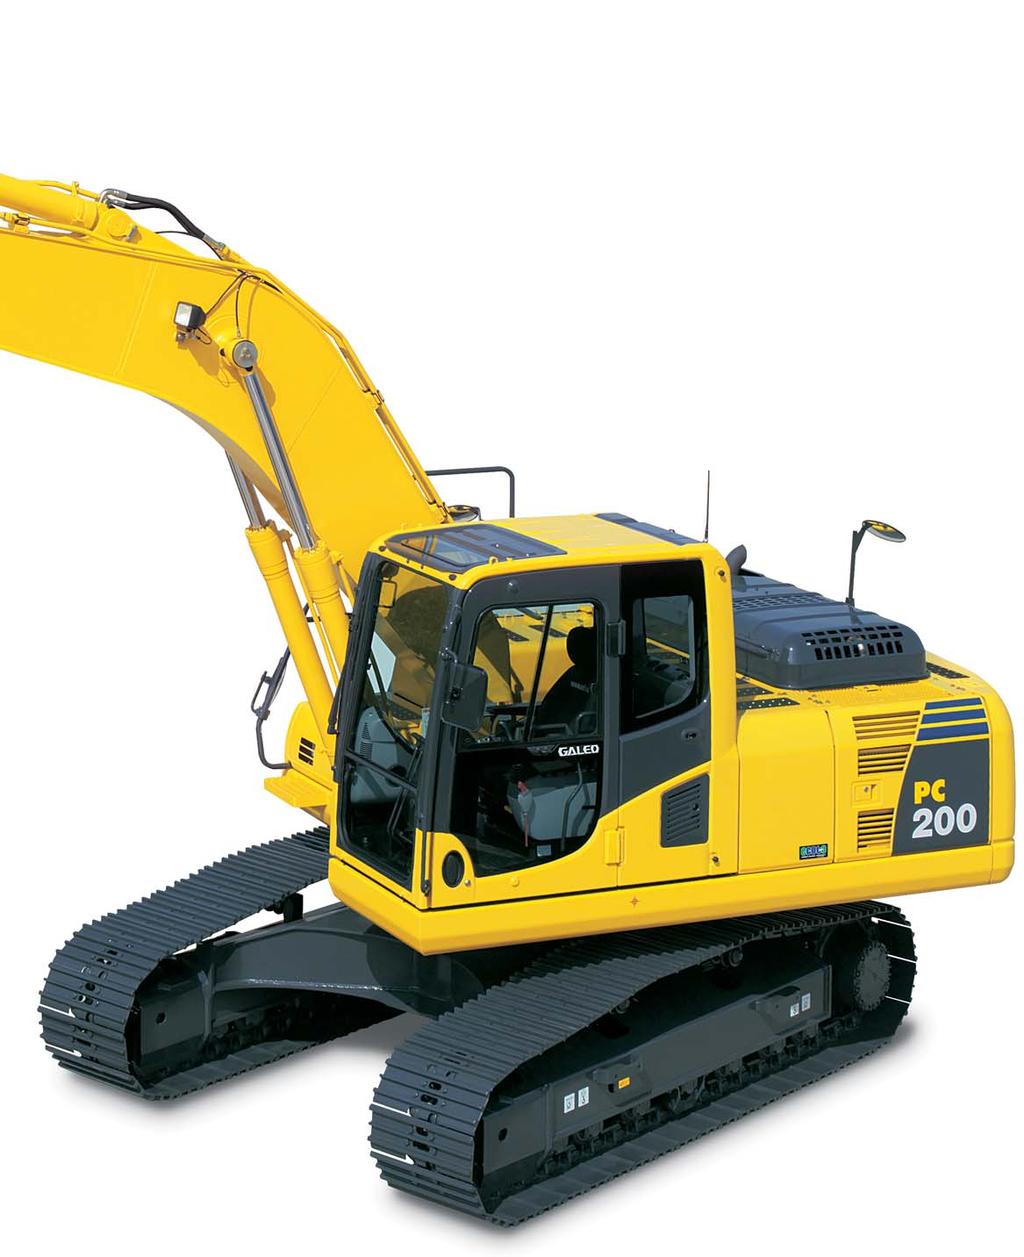 HYDRAULIC EXCAVATOR PC00-8 Large Comfortable Cab Low-noise cab, similar to passenger car Low vibration with cab damper mounting Highly pressurized cab with optional air conditioner Operator seat and